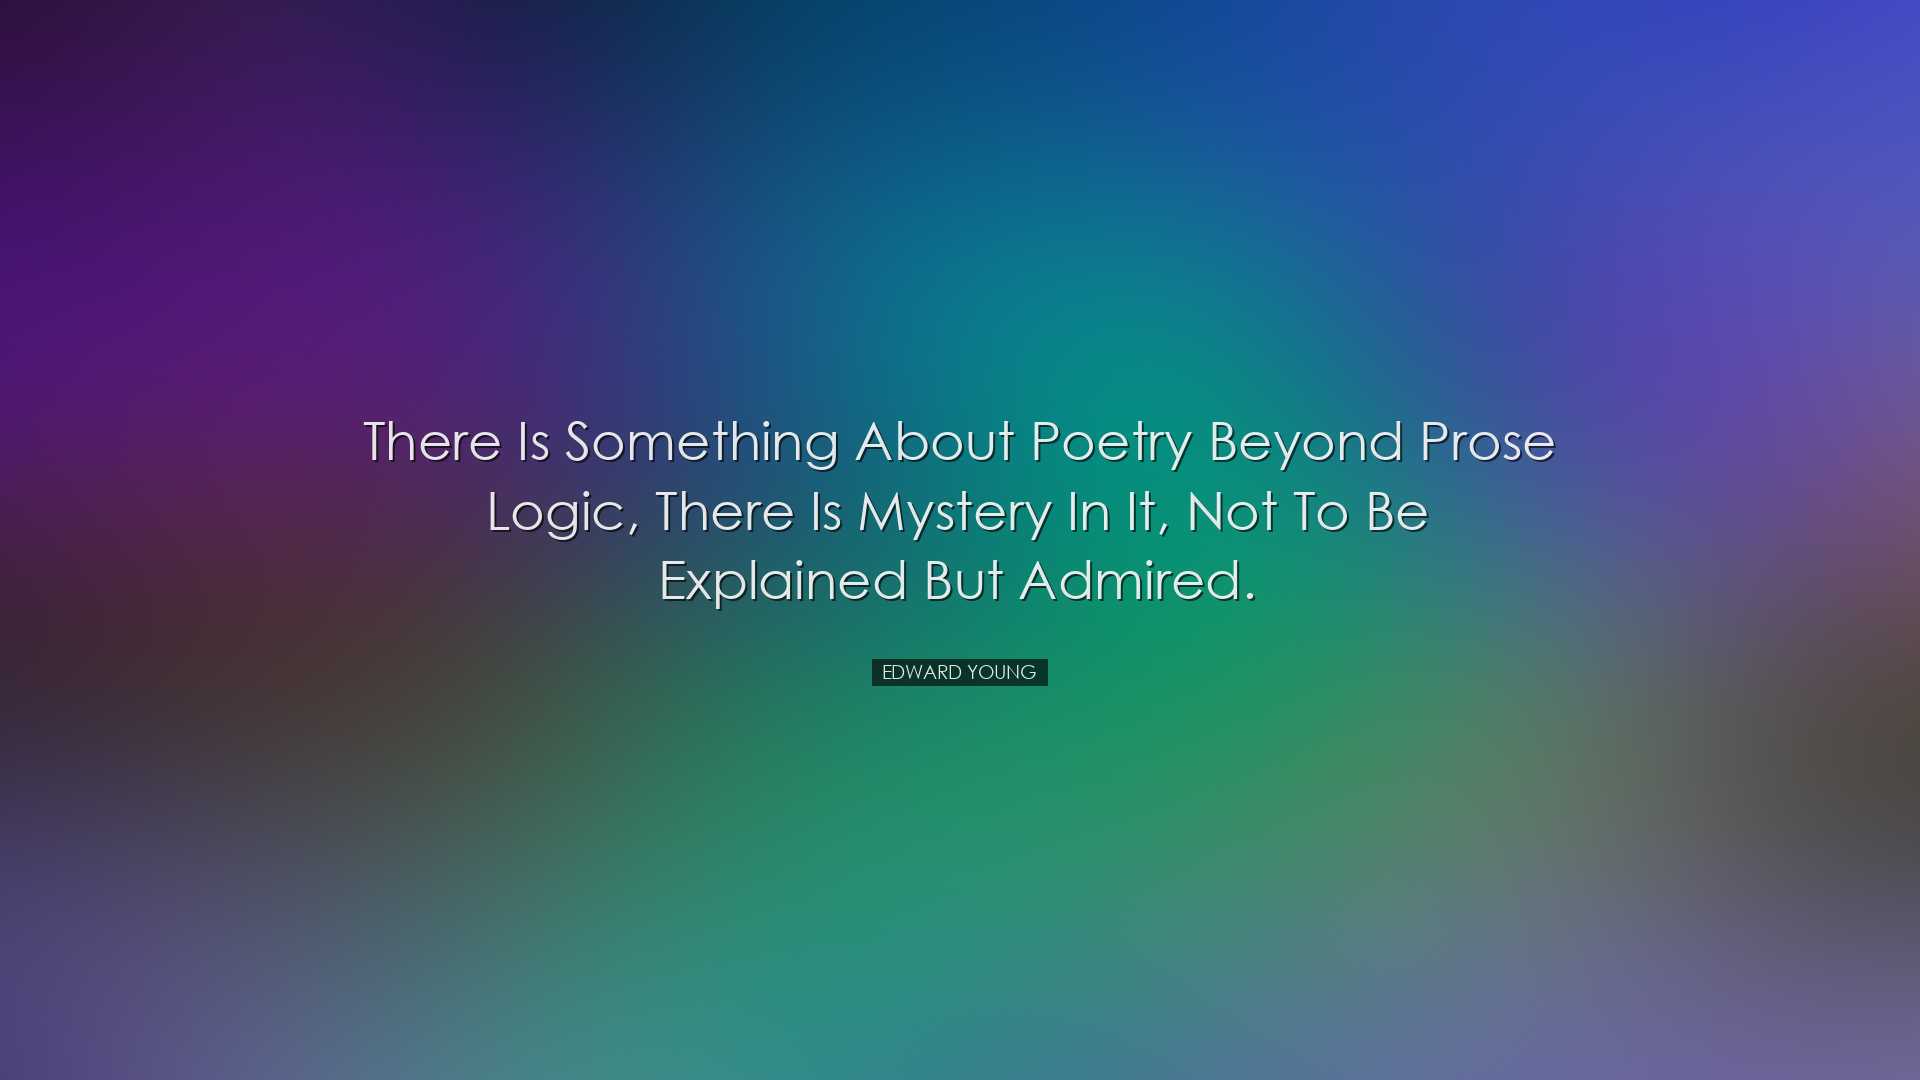 There is something about poetry beyond prose logic, there is myste